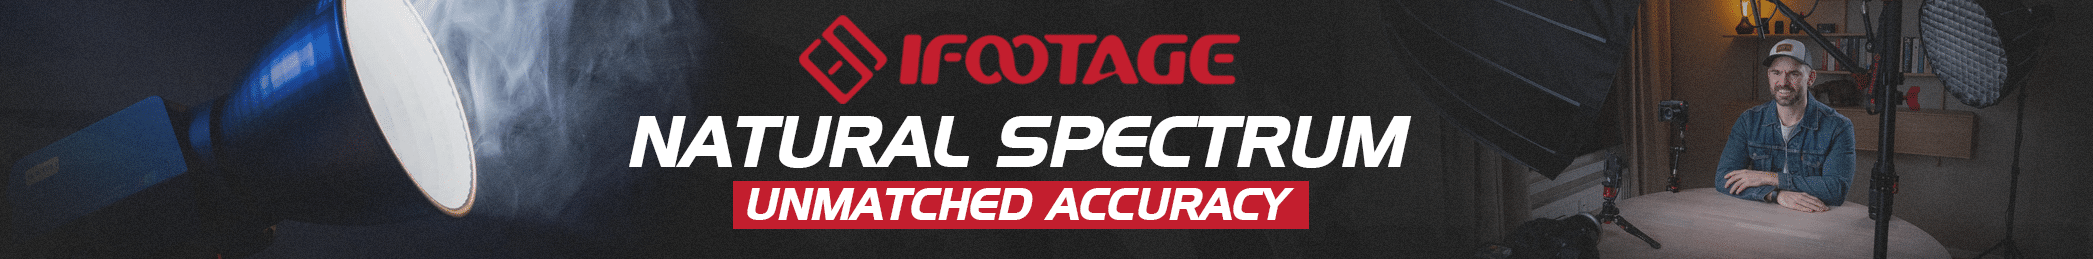 iFootage | Natural Spectrum | Unmatched Accuracy | www.ifootagegear.com